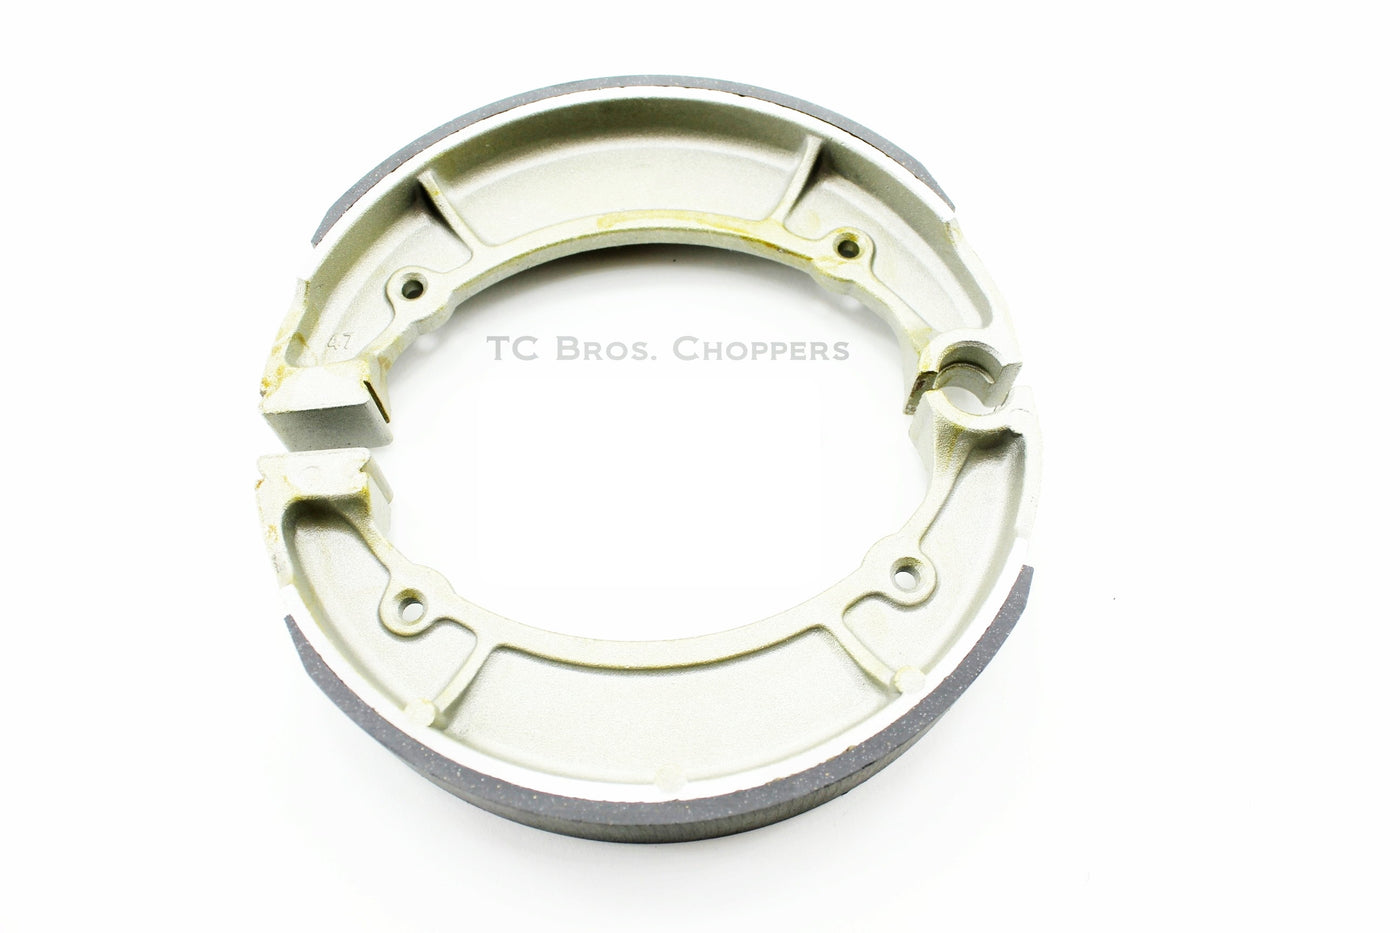 An image of Moto Iron® Yamaha XS650 Rear Drum Brake Shoes that fit 72-83 Drum Wheels on a white background.